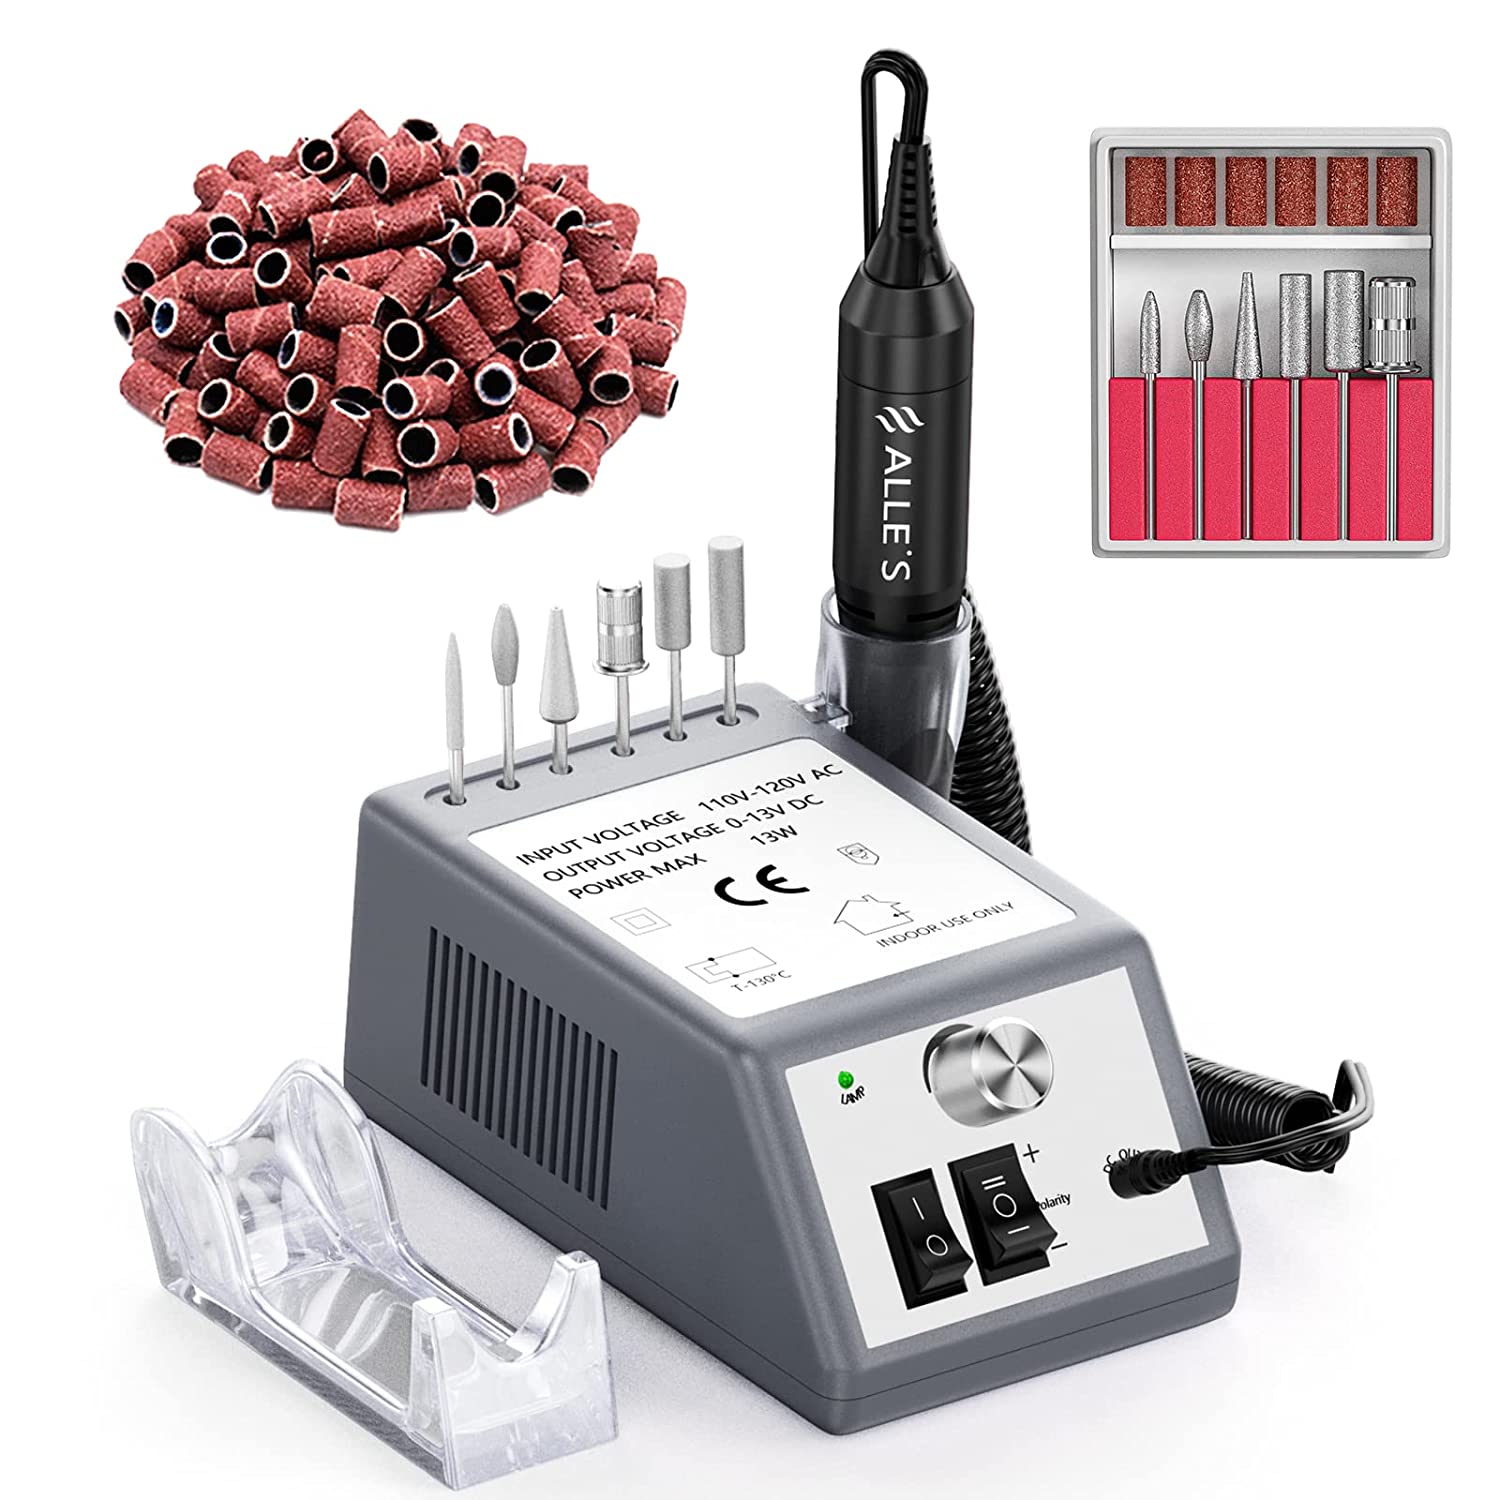  1. Alle’s Professional Nail Drill Set Machine 